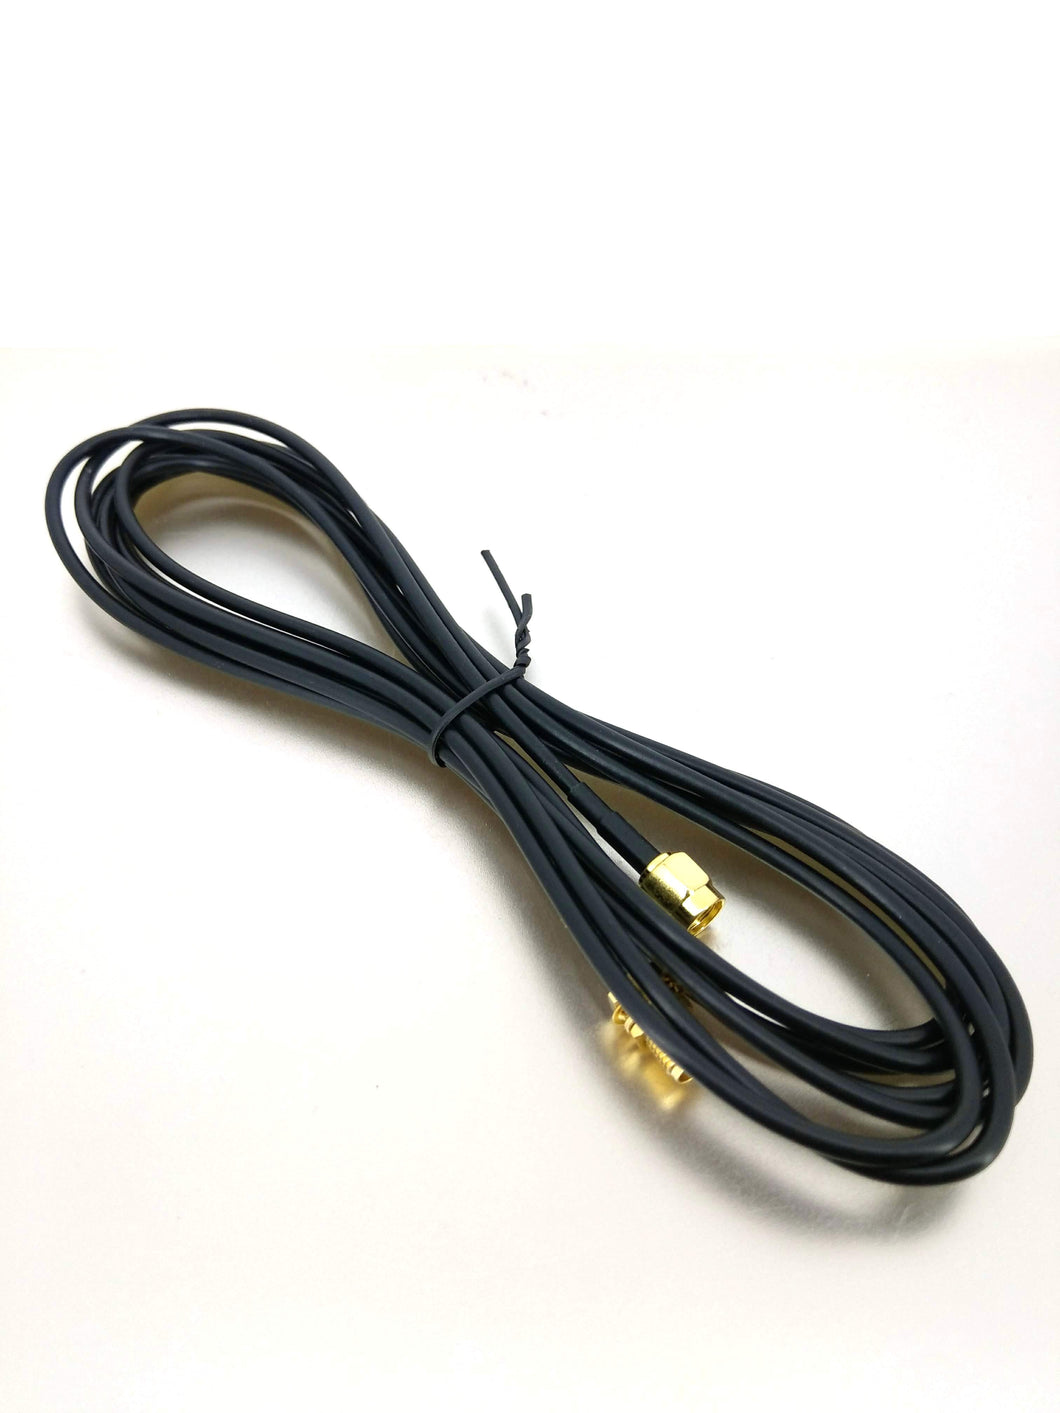 WiFi Antenna Extension Cable (3M)RP-SMA-J TO RP-SMA-K